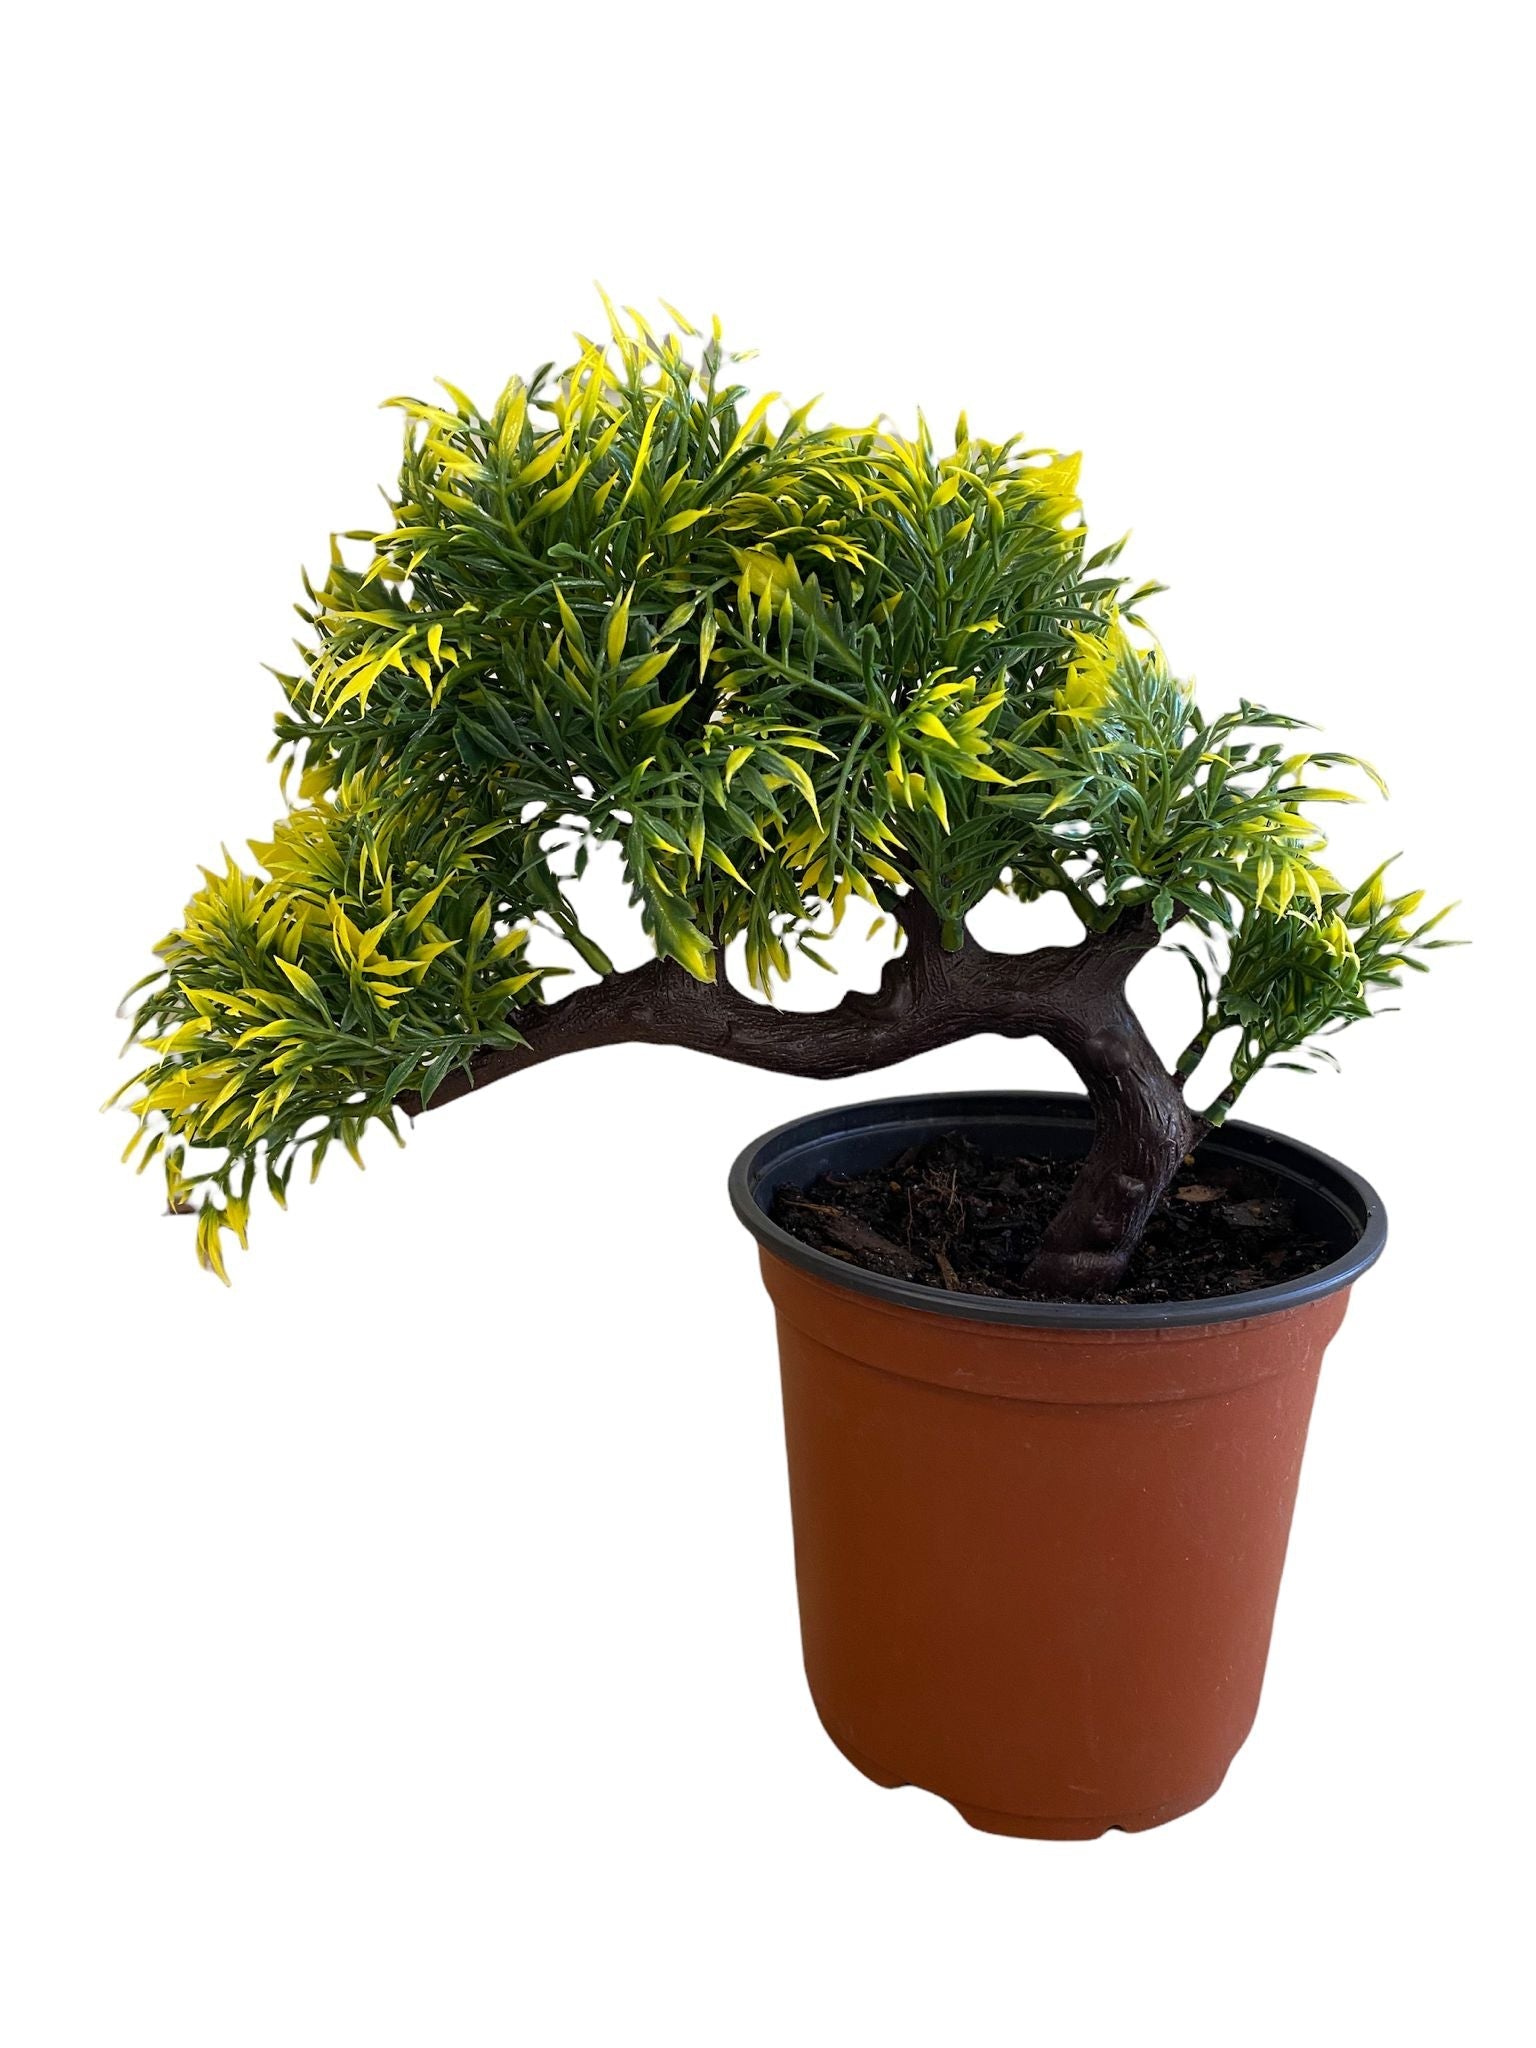 Gorgeous Bonsai with Very Attractive Pot with Yellow Tint leaves